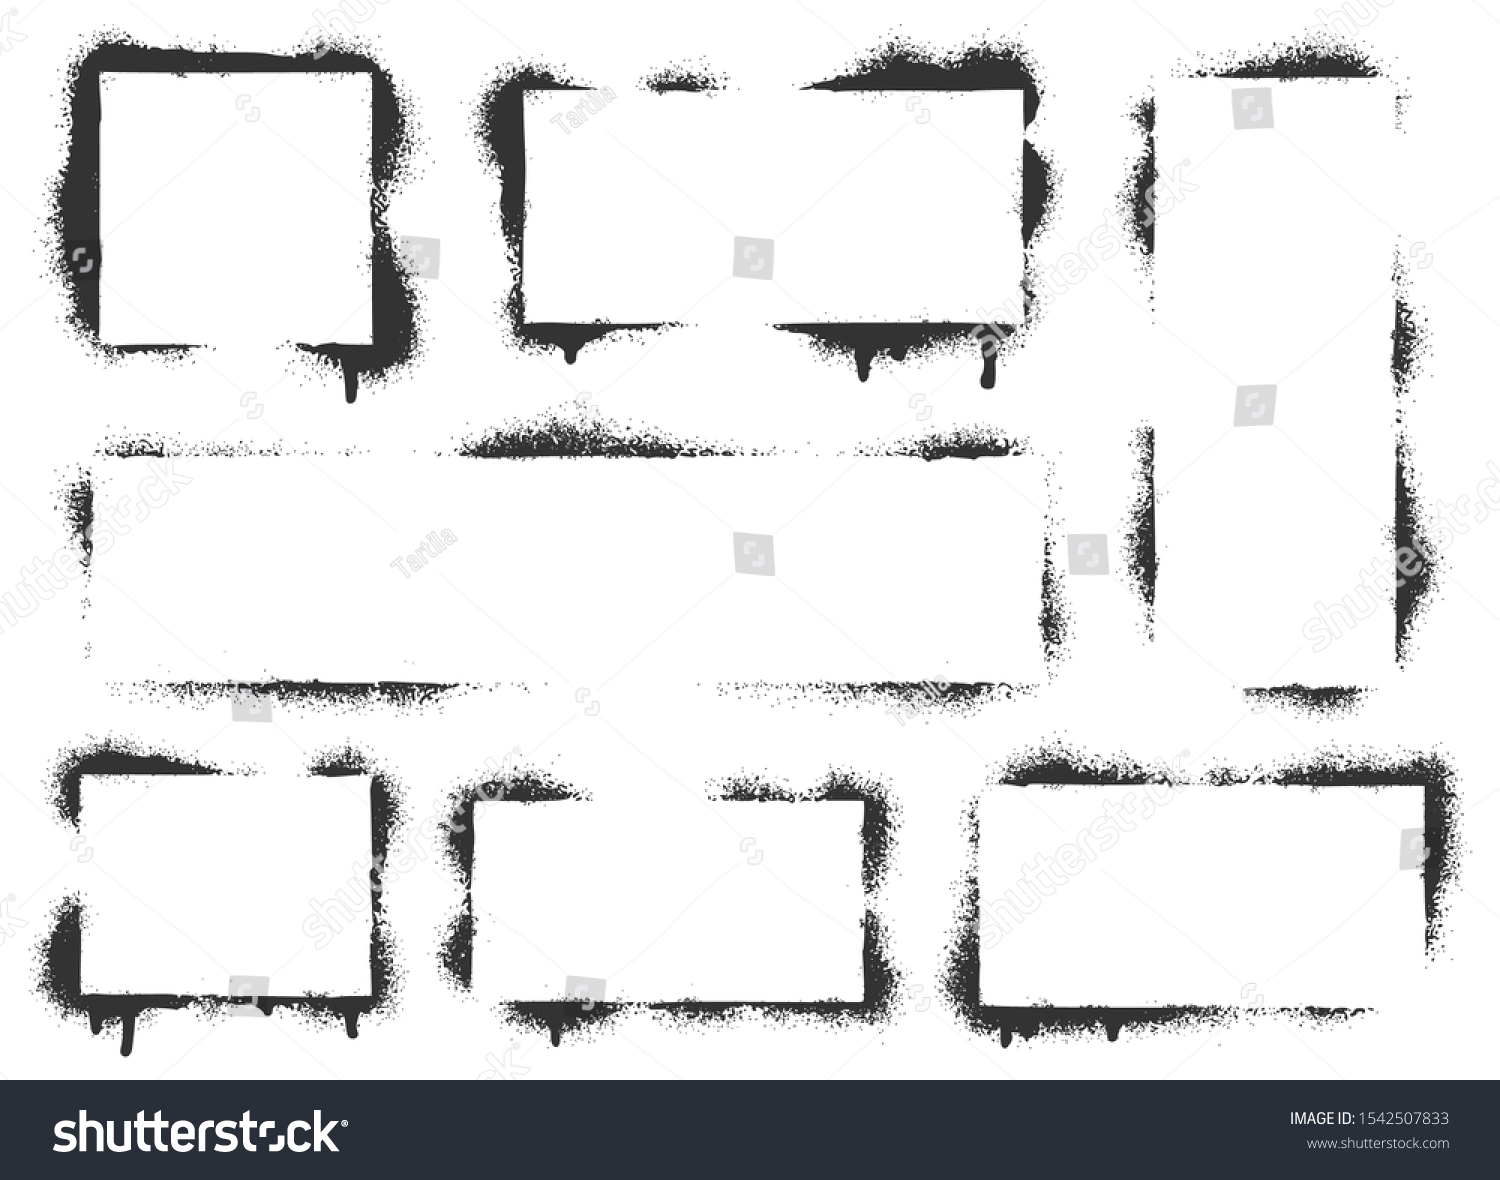 SVG of Spray paint graffiti stencil frames. Black airbrushing paint banner, stenciling backdrop and spray paint texture borders. Brush splash abstract rectangular stencil border. Isolated vector icons set svg